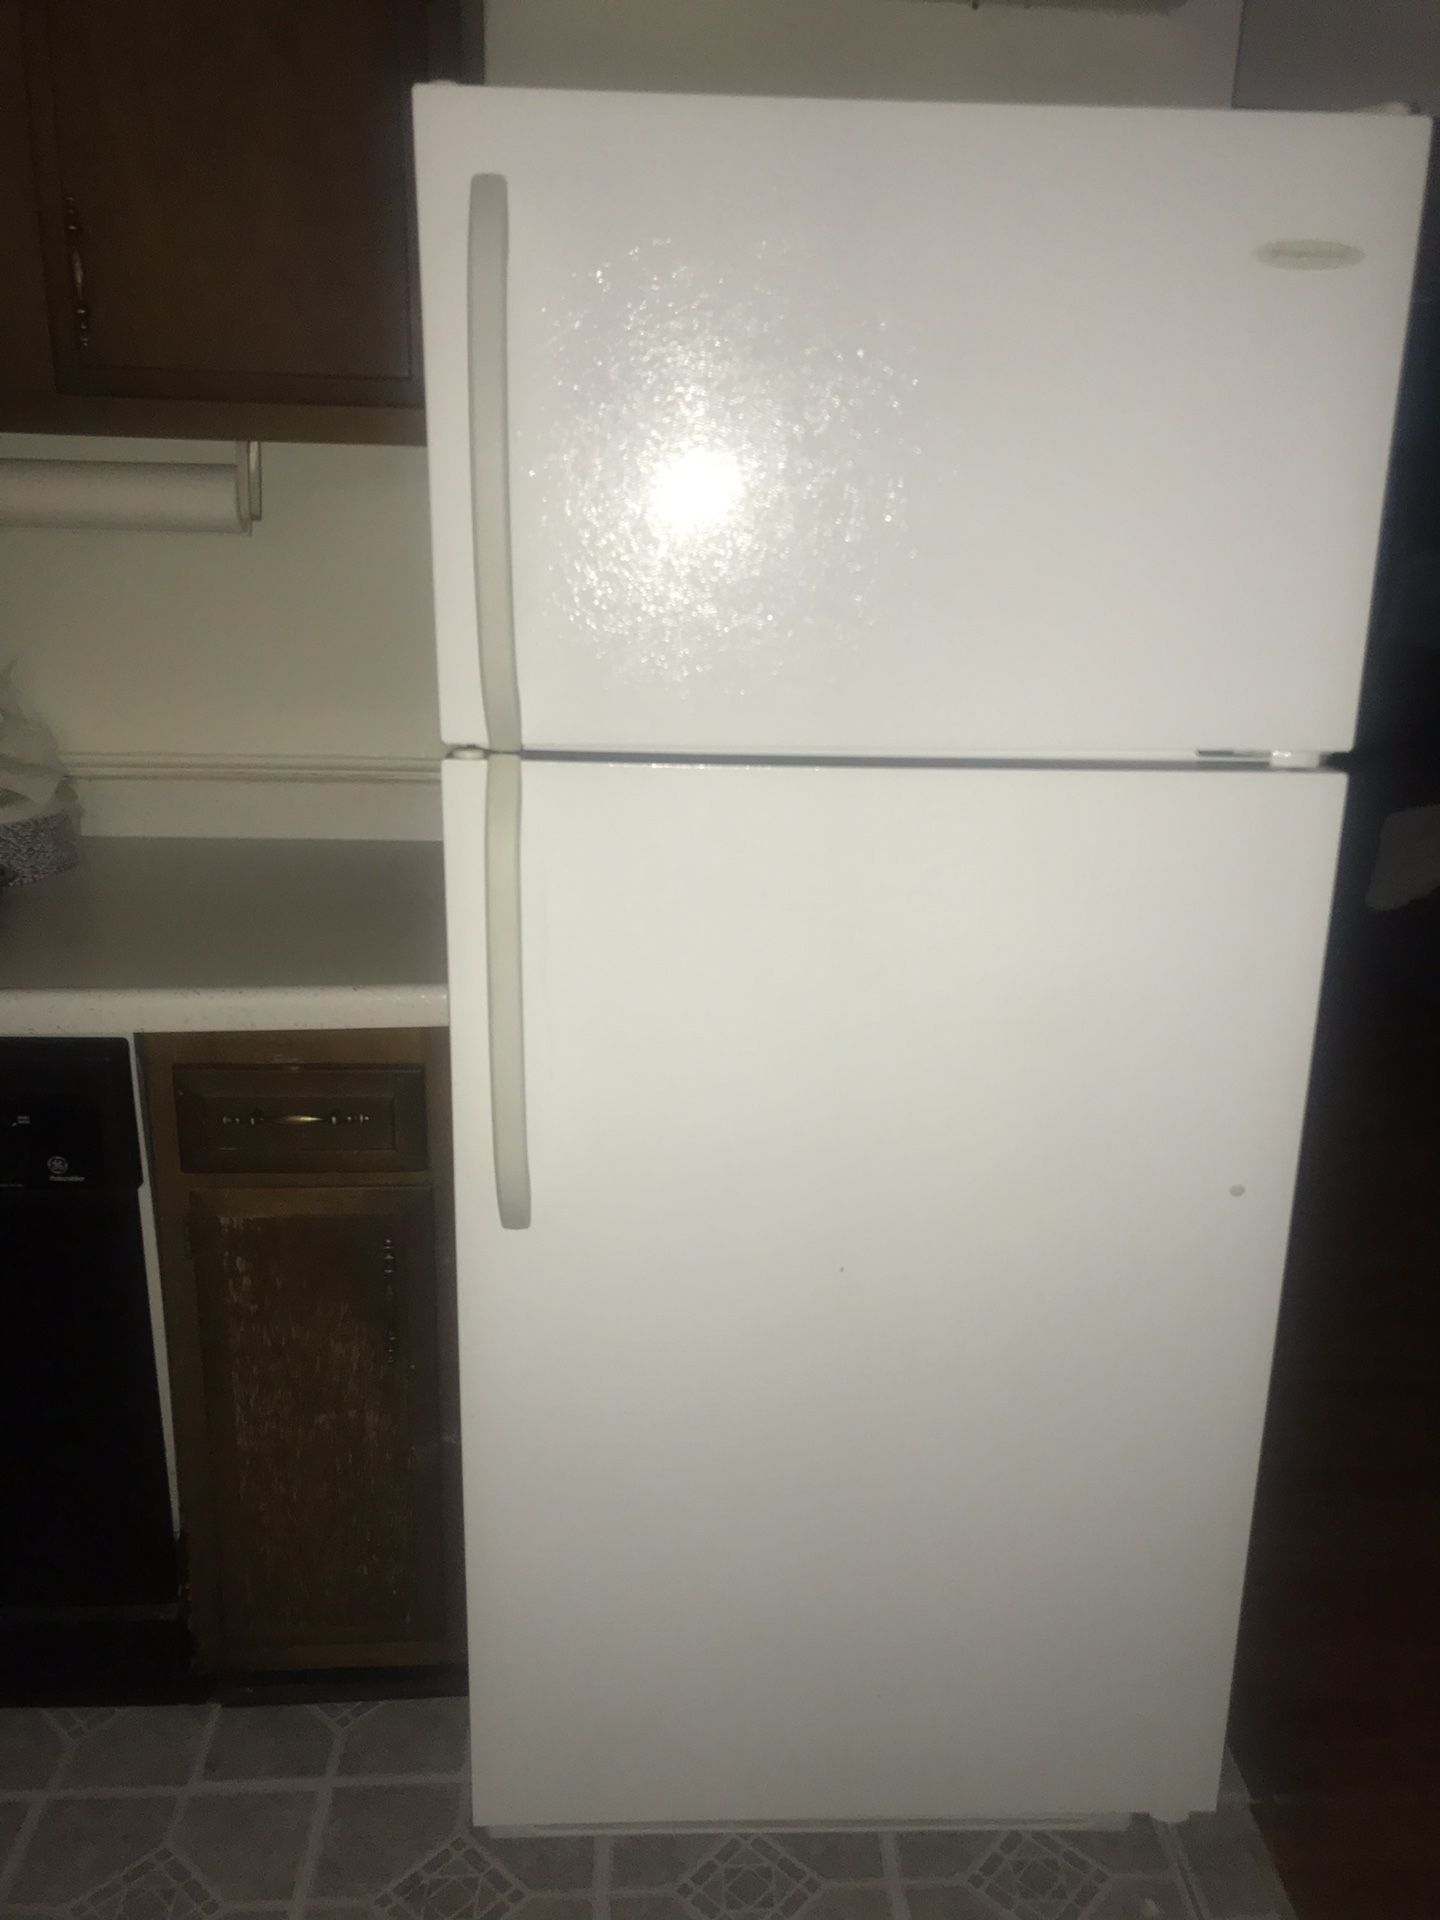 **NEED TO SELL DEAL** Frigidaire Refrigerator and Gas Range and GE Potscrubber Dishwasher $700 *OPEN TO NEGOTIATE